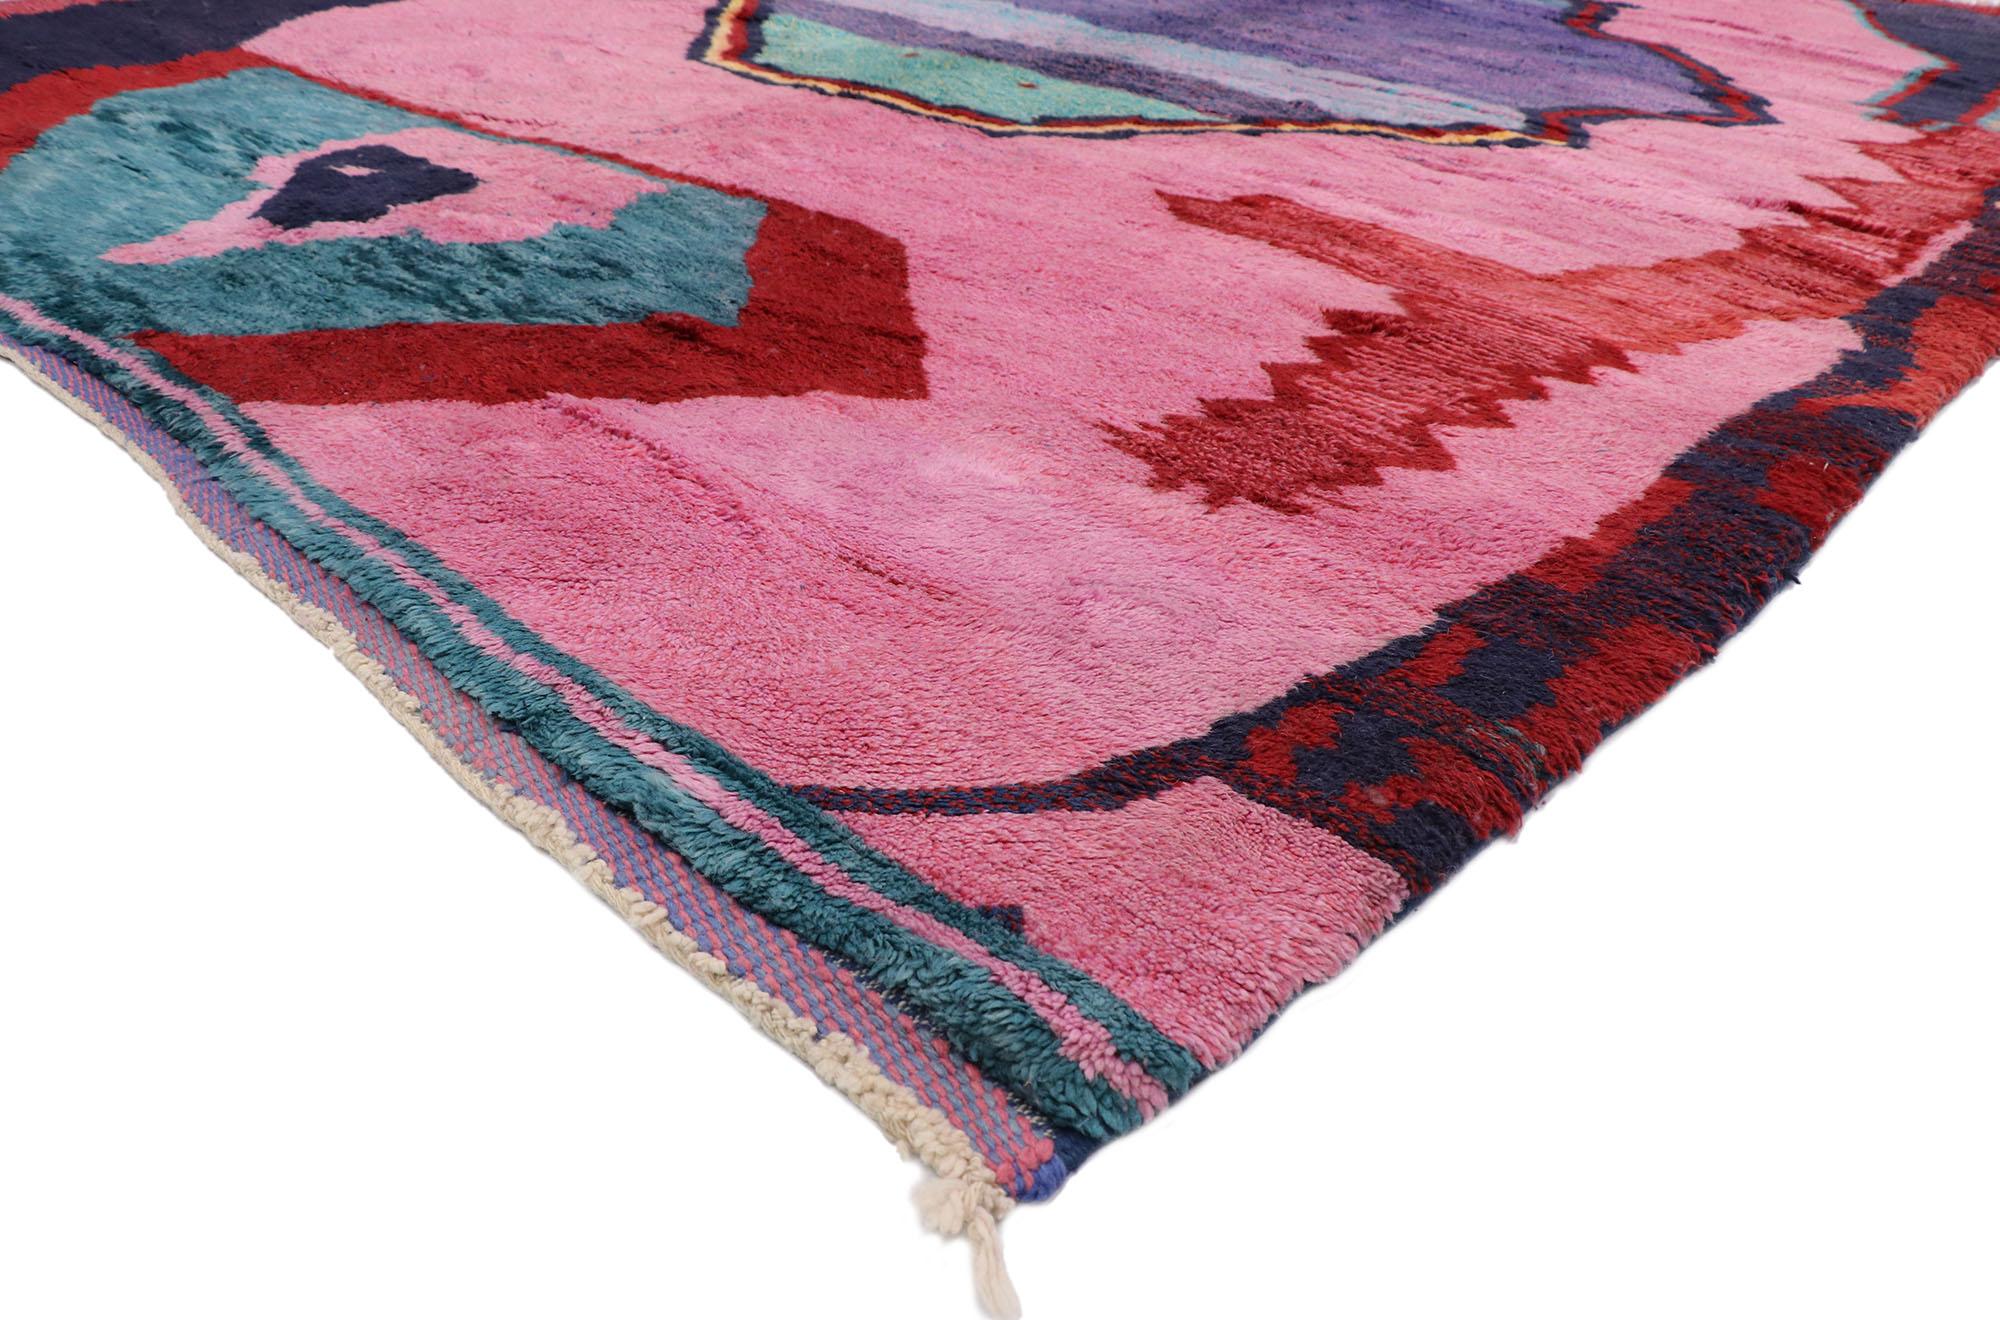 21102 Large Authentic Colorful Abstract Berber Moroccan Rug, 10'01 x 13'05.
Cubism meets nomadic charm in this hand knotted wool Berber Moroccan rug. The visual complexity and intense color palette woven into this piece work together creating a